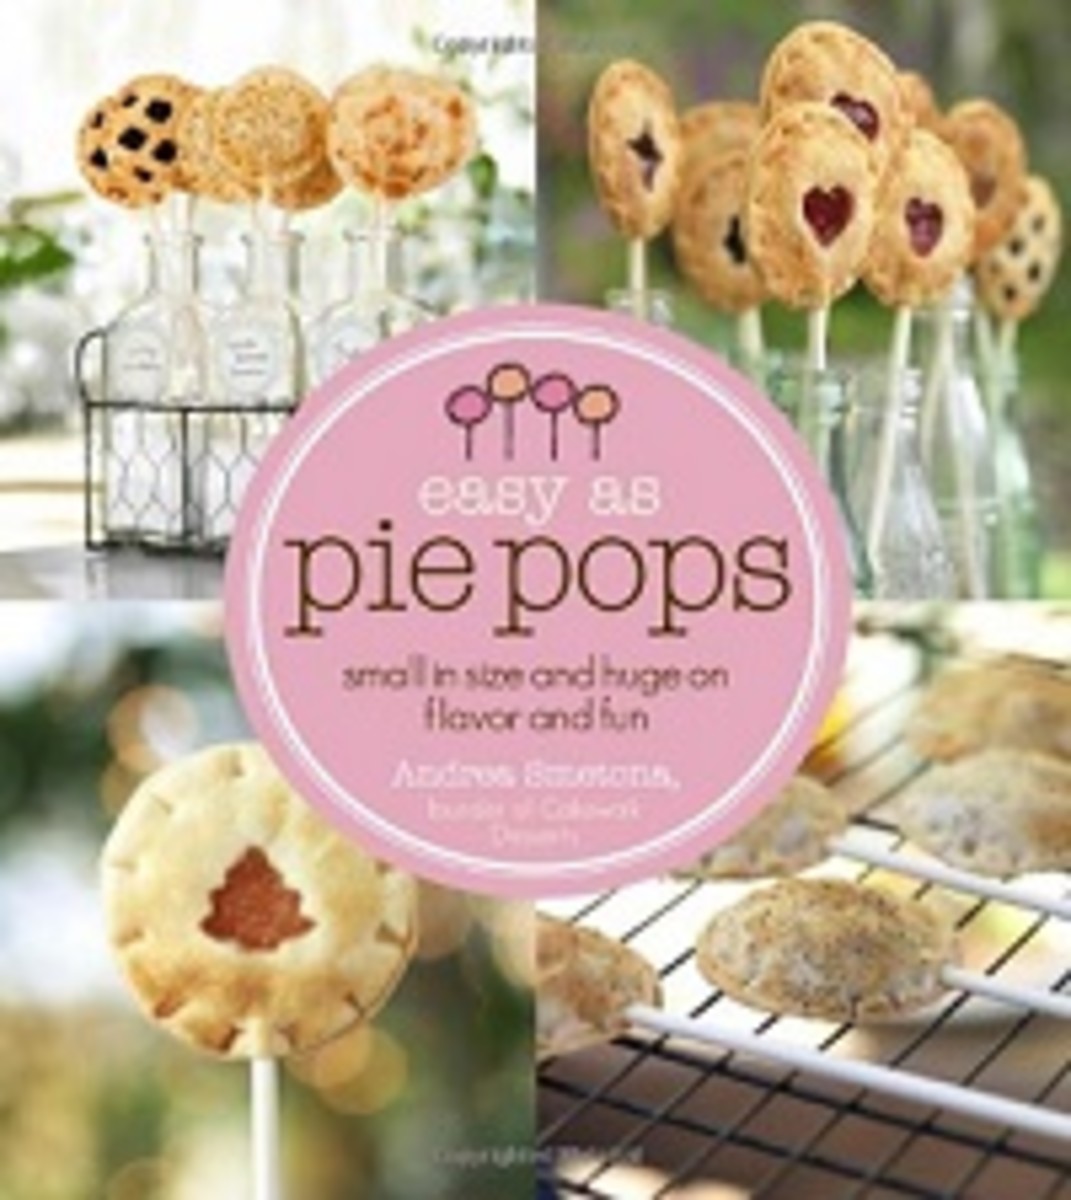 Easy as Pie Pops: Small in Size and Huge on Flavor and Fun